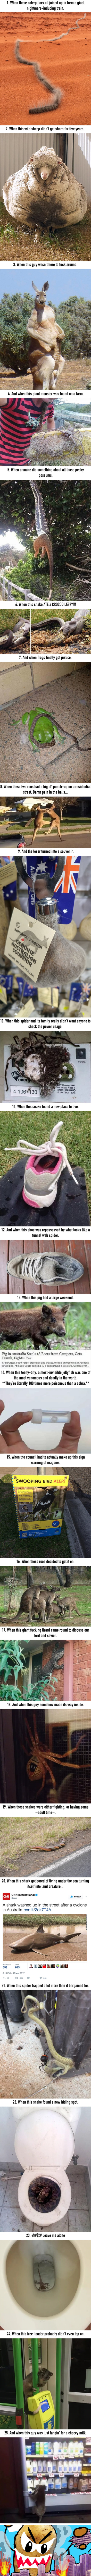 25 Times Australian Animals Just Took Things Way Too Far